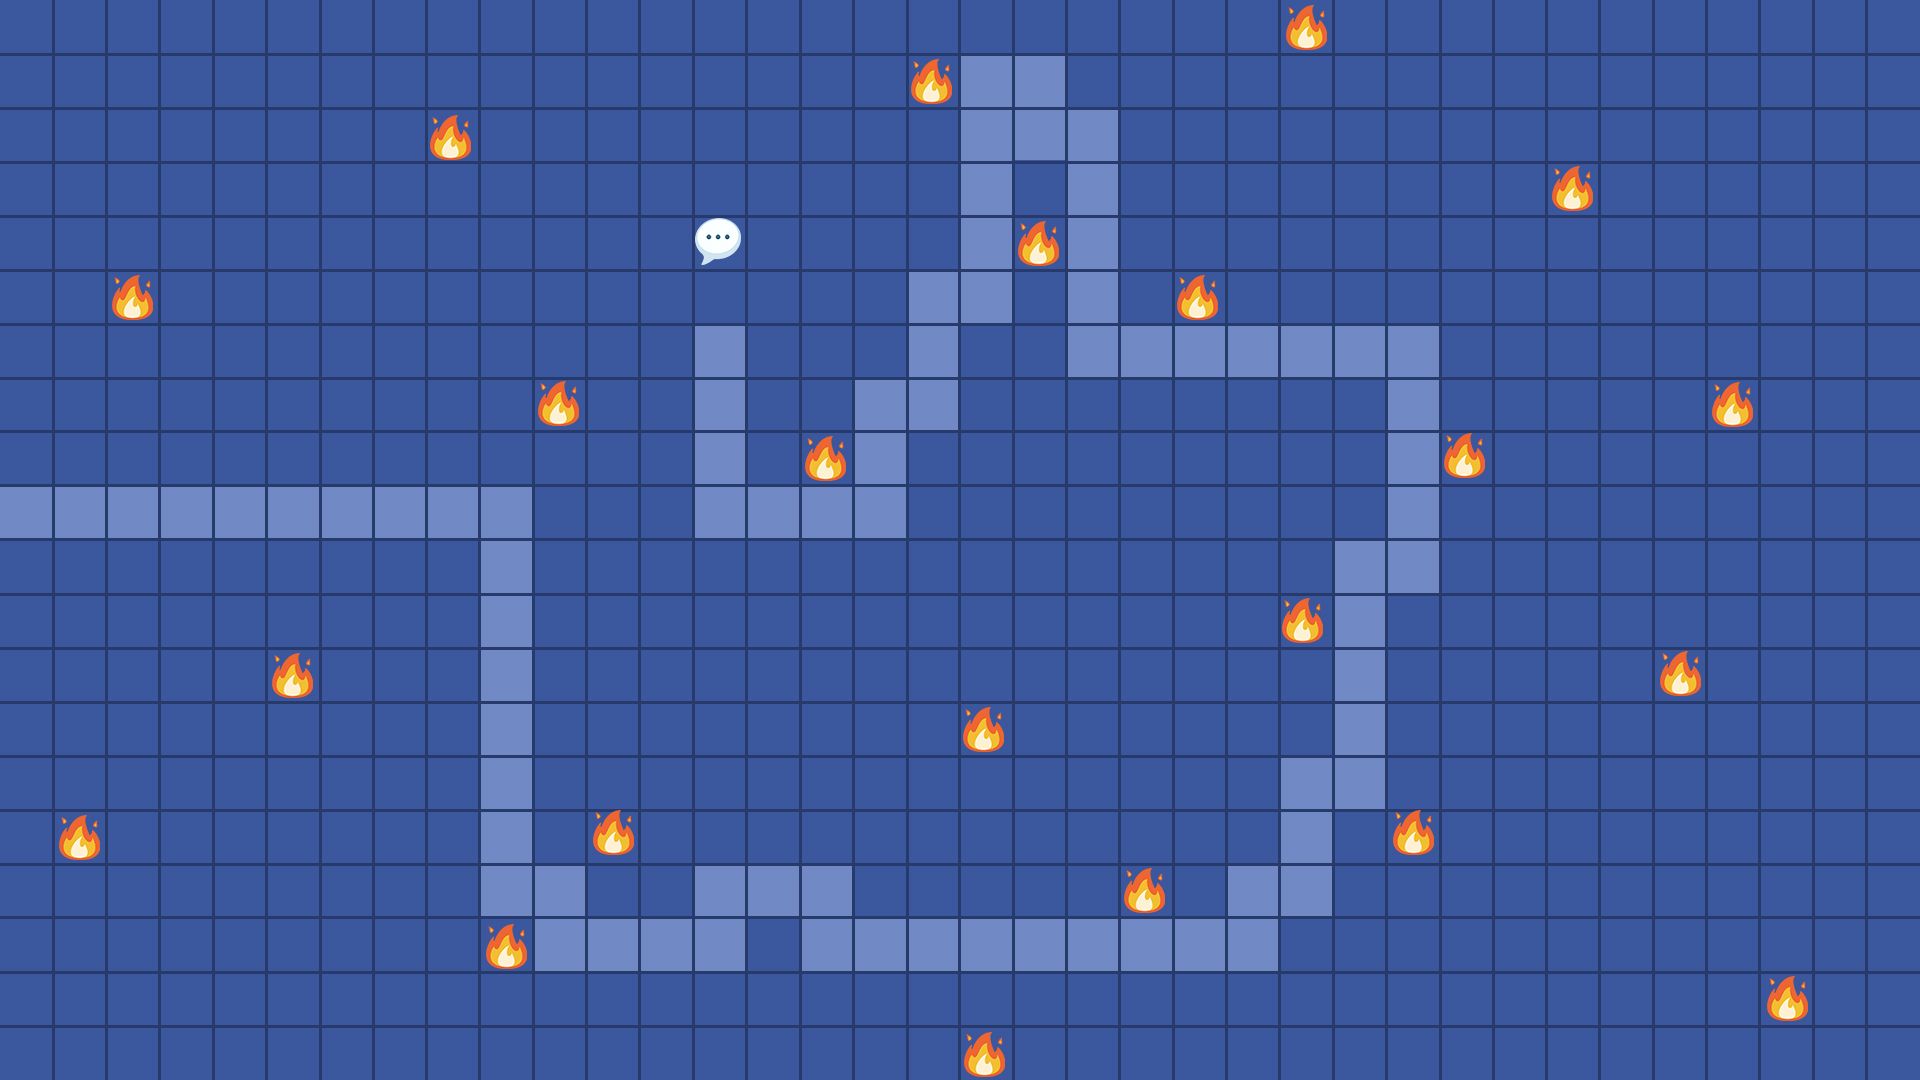 The Facebook logo superimposed into flaming version of the PC game Minesweeper.